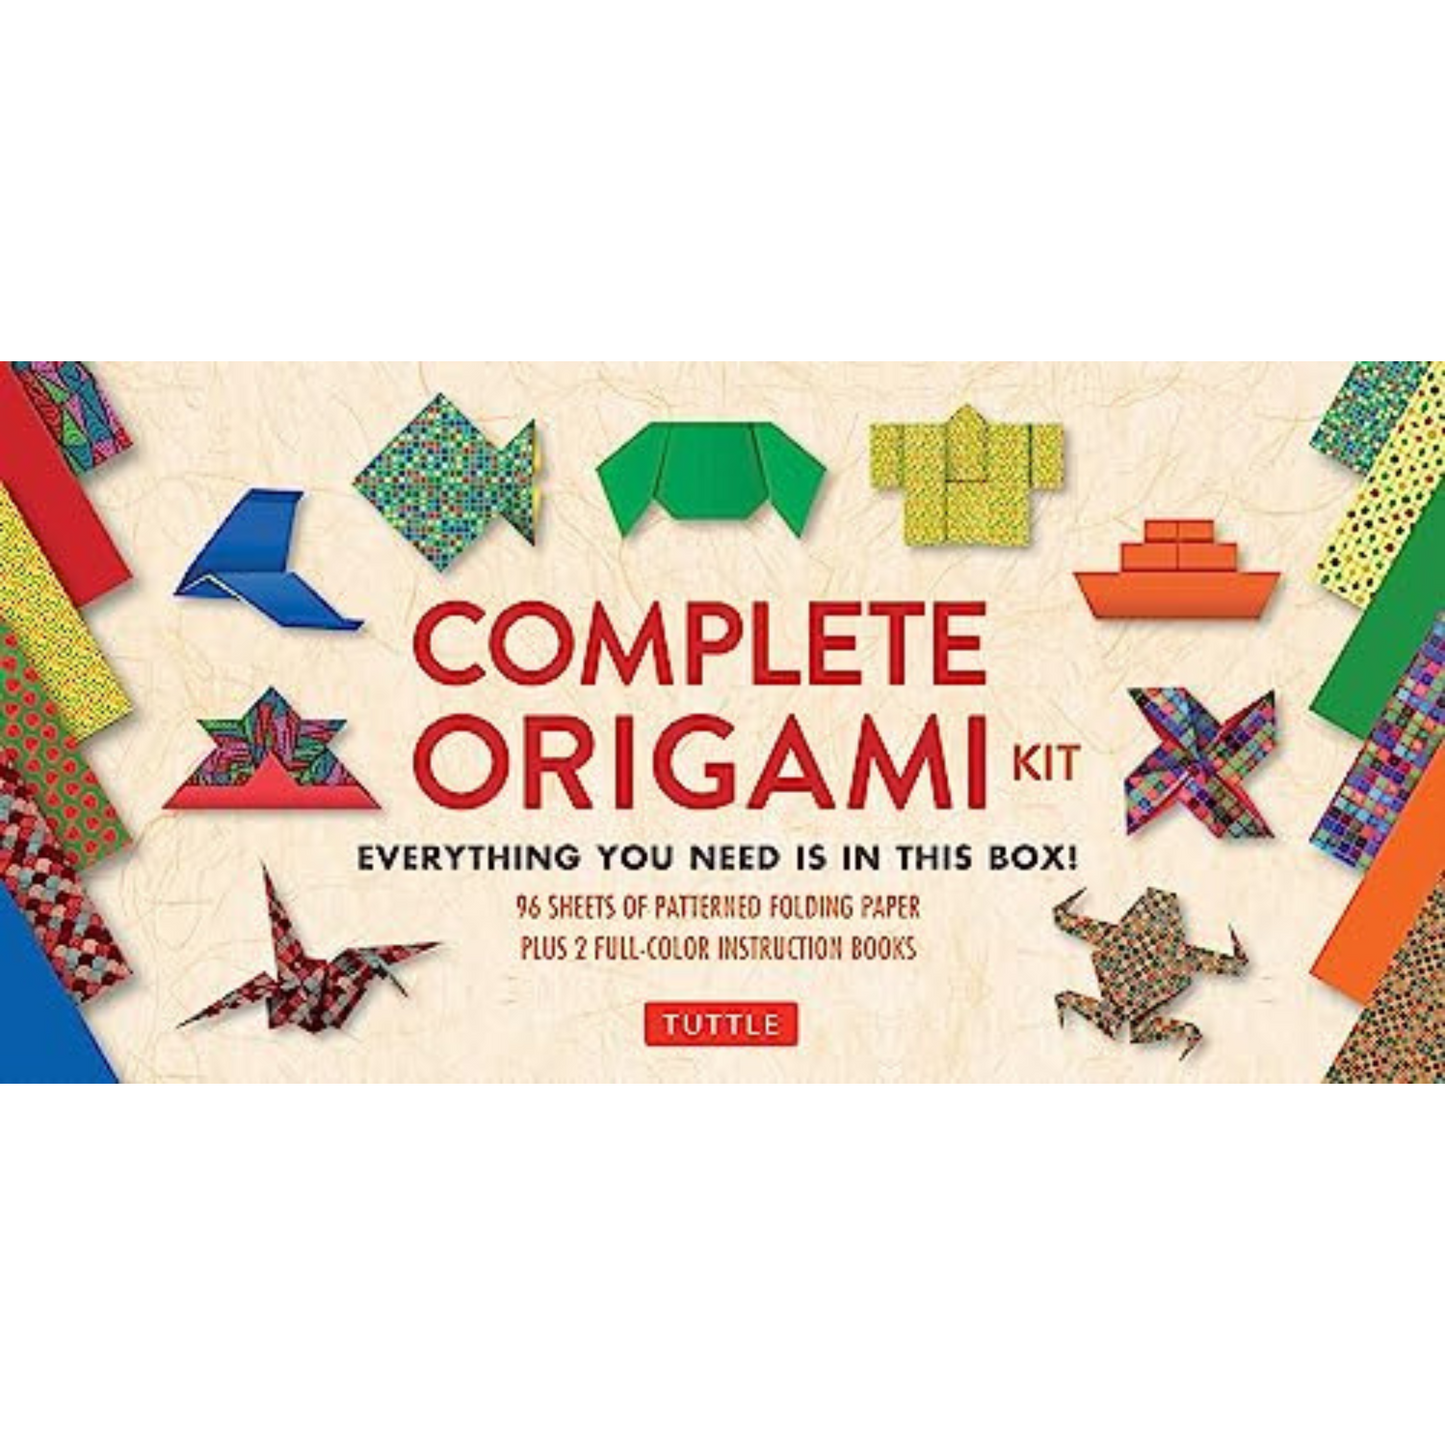 Complete Origami Kit [2 Origami How-to Books, 98 Papers, 30 Projects]